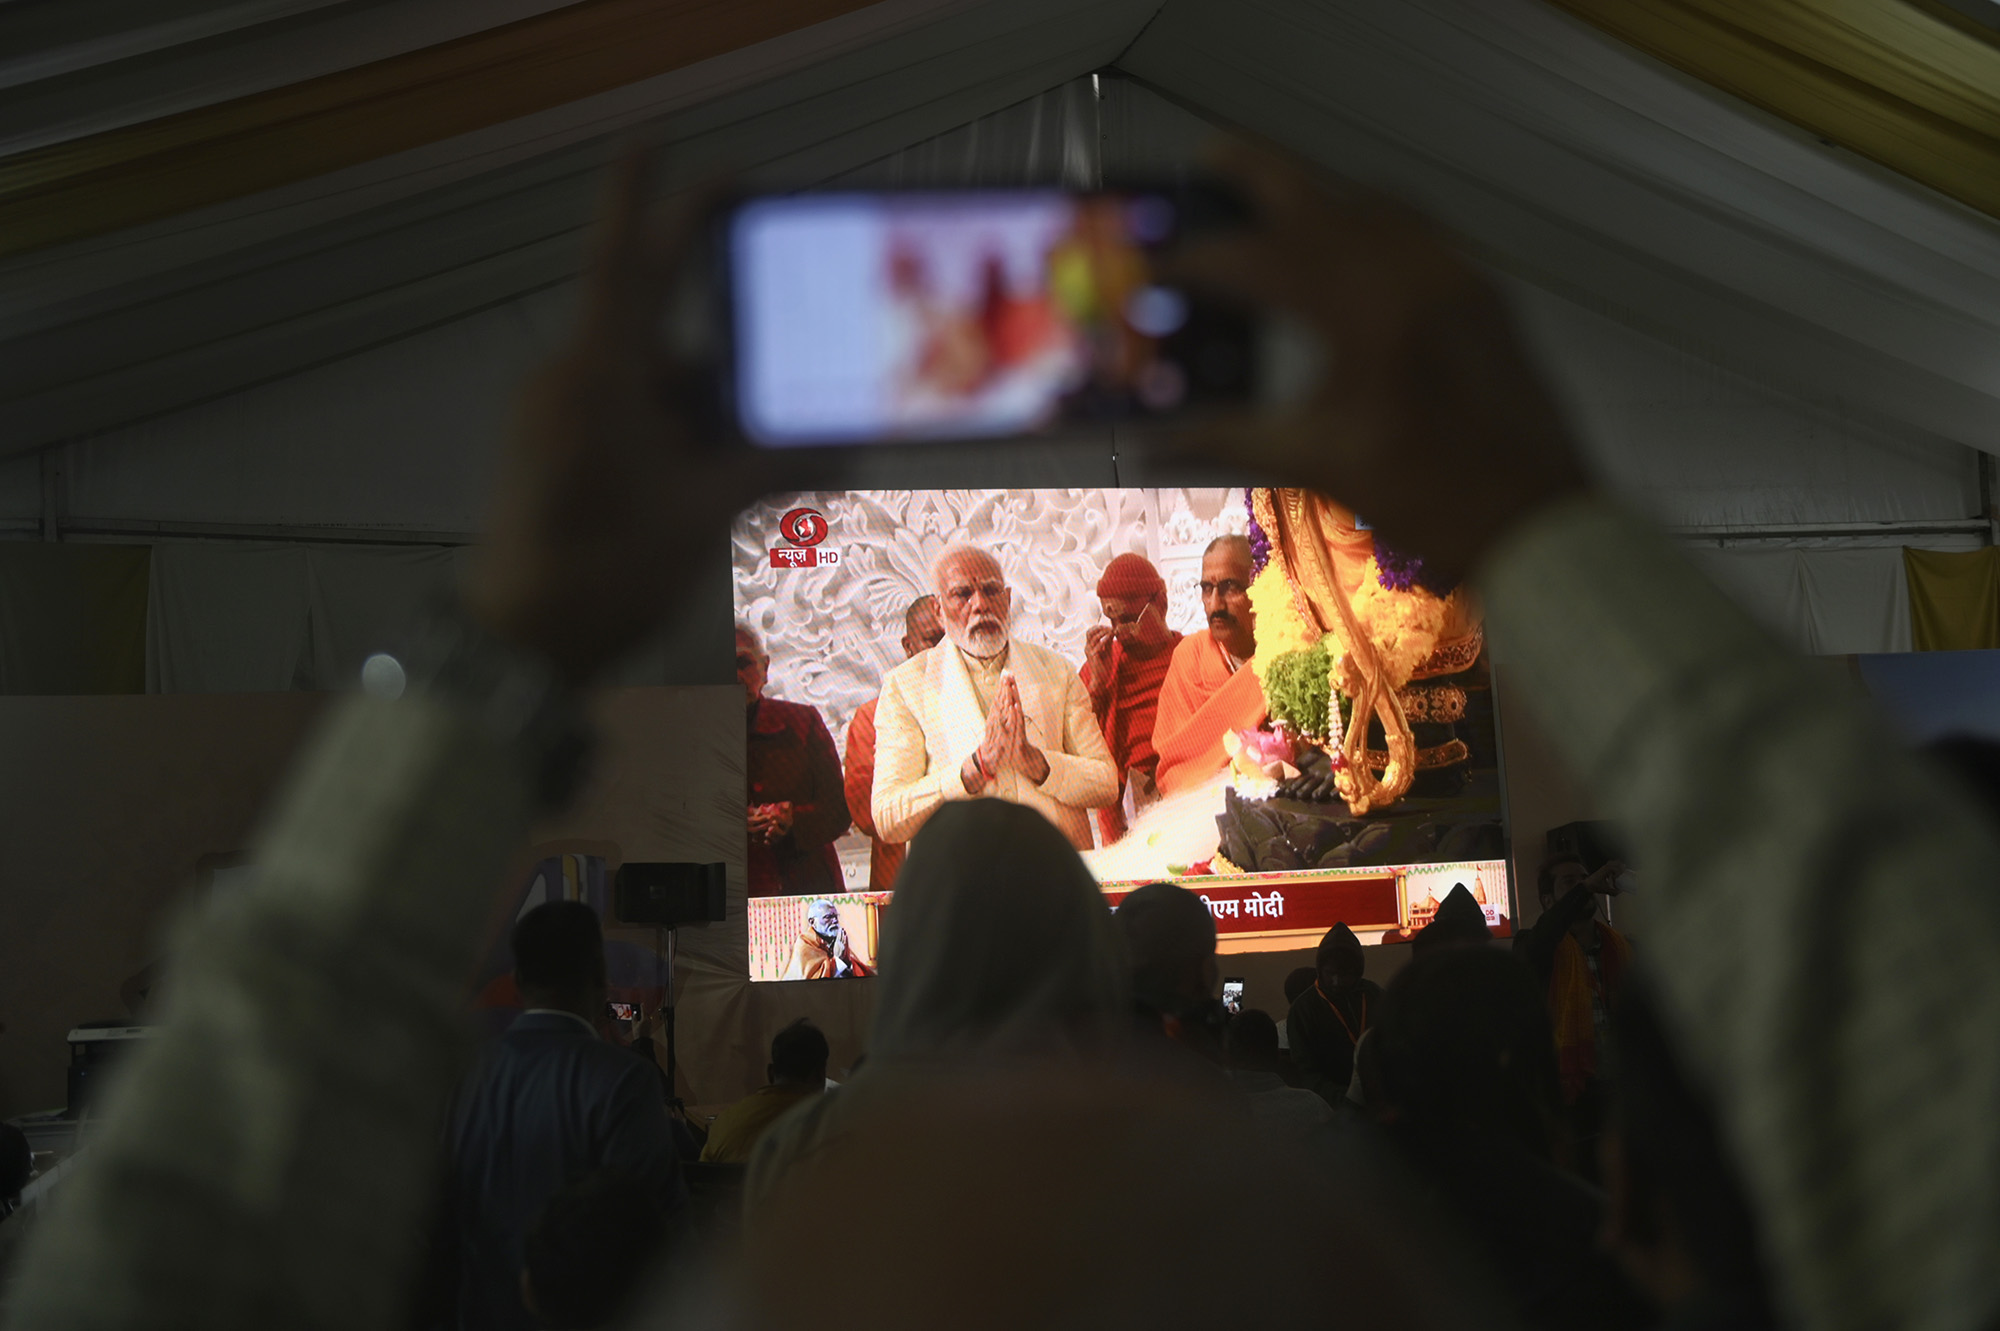 People watching the Ram temple consecration ceremony by Prime Minister of India, Narendra Modi, on a live streaming screen in a media center in Ayodhya, India, on January 22.